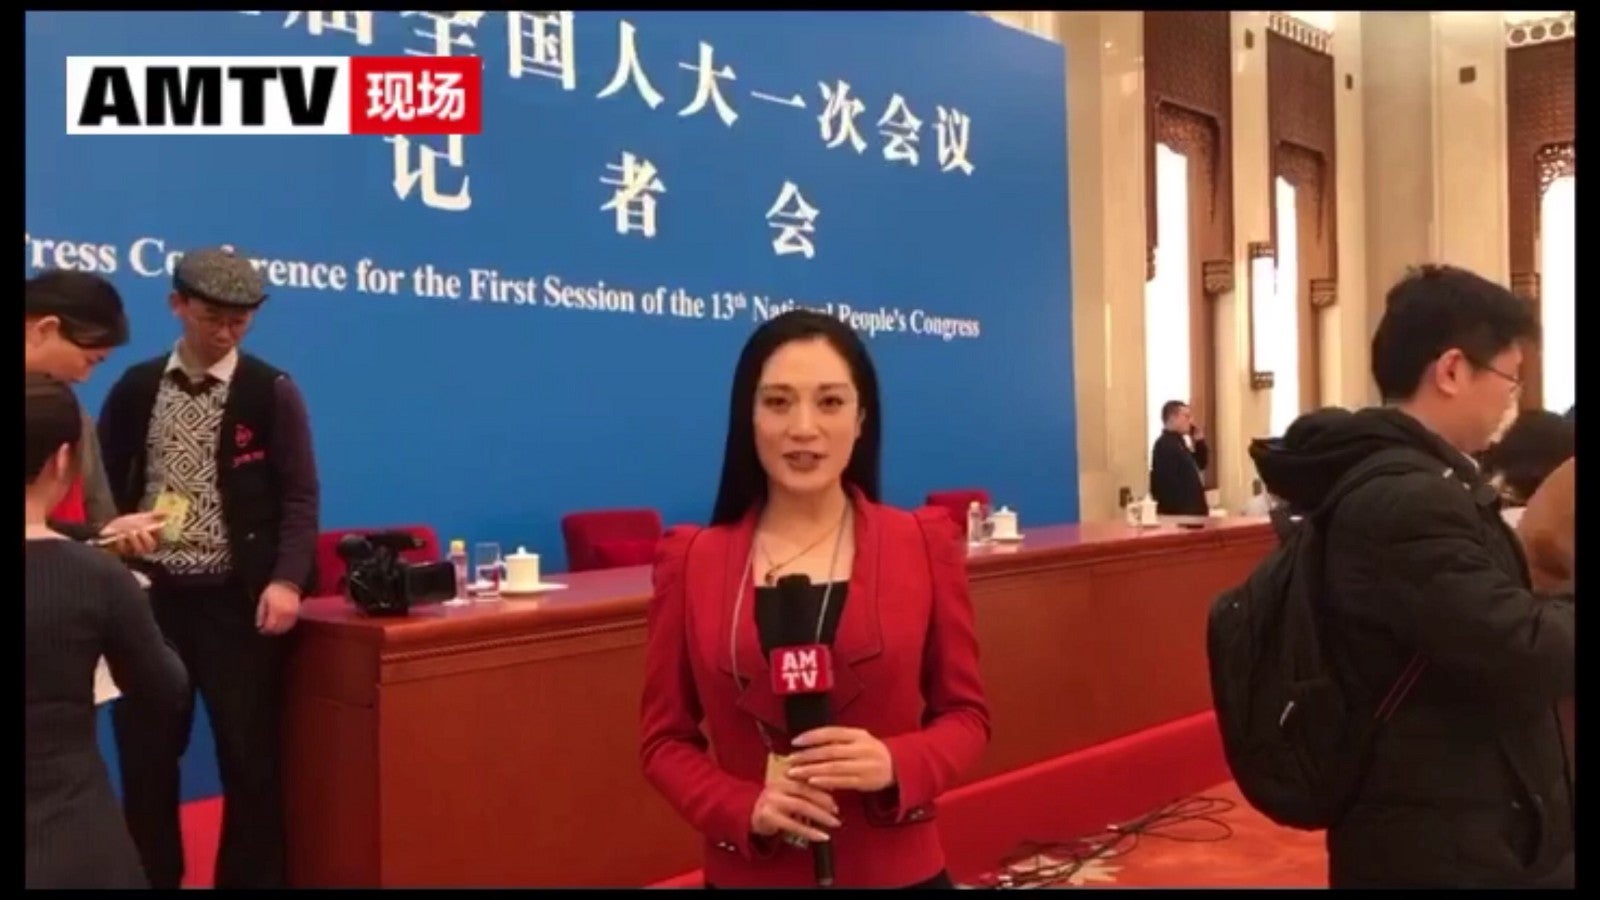 Chinese Reporter Steals The Show With An Epic Eye Roll In China's Annual Parliament Session - WORLD OF BUZZ